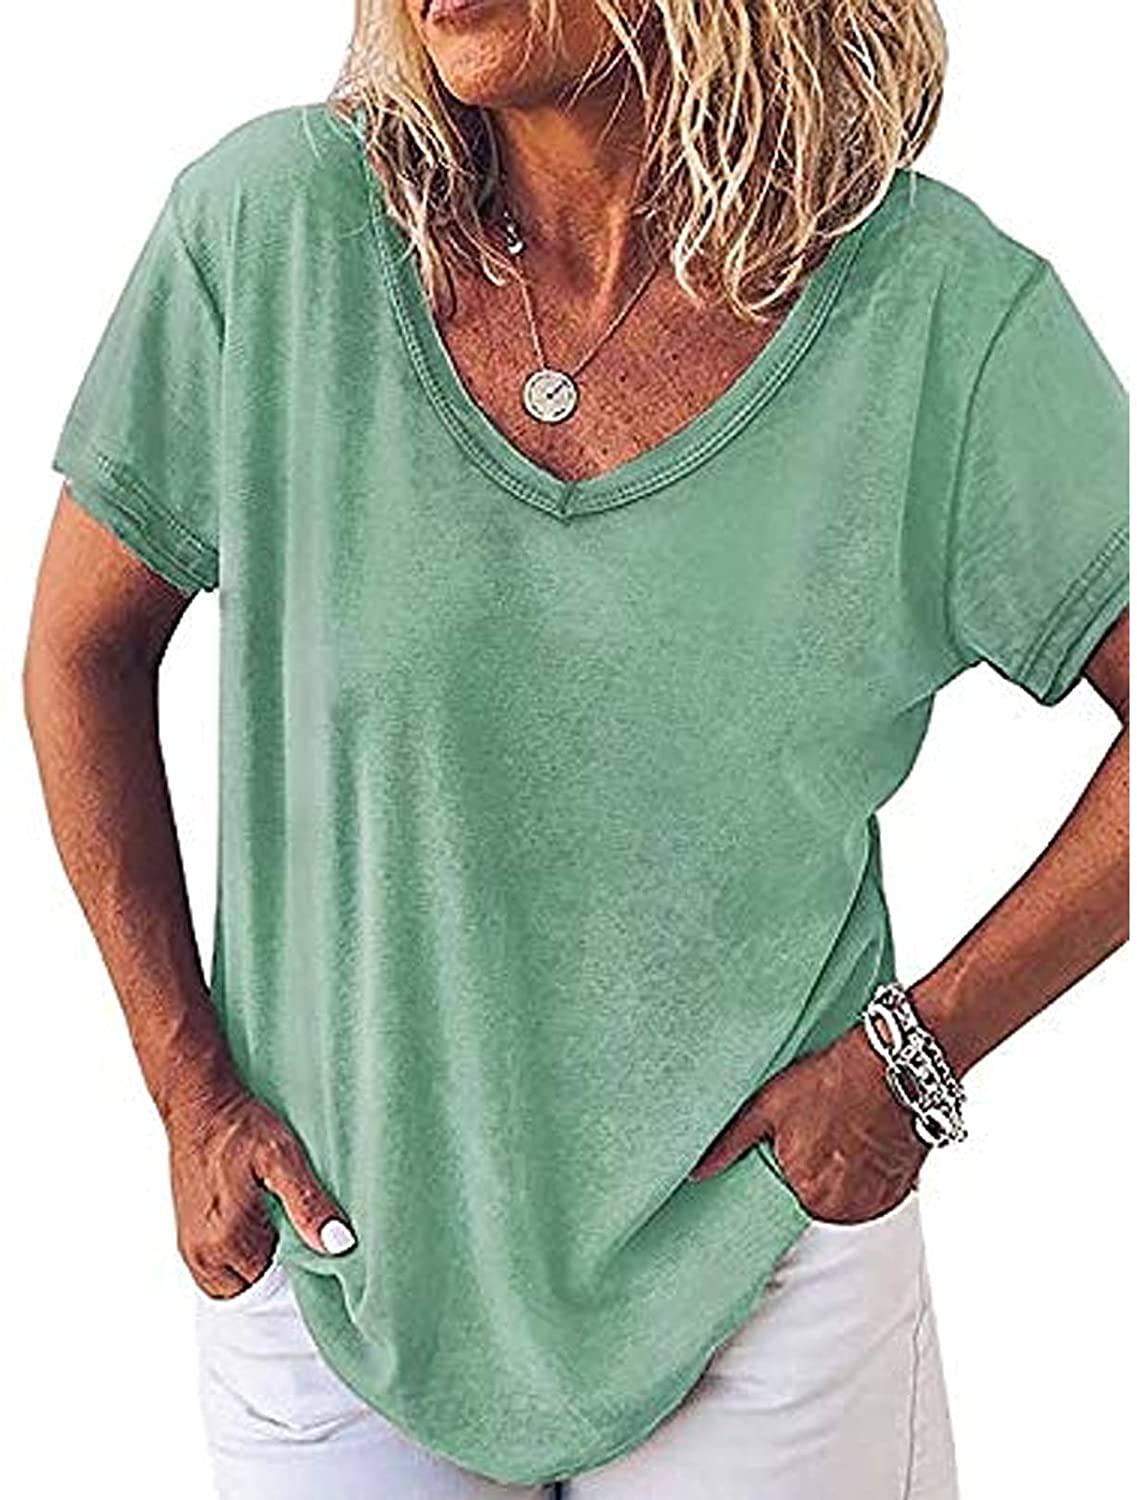 Fessceruna Womens Short Sleeve V Neck T Shirt Summer Casual Loose Solid Basic Tunic Tee Top Blouse